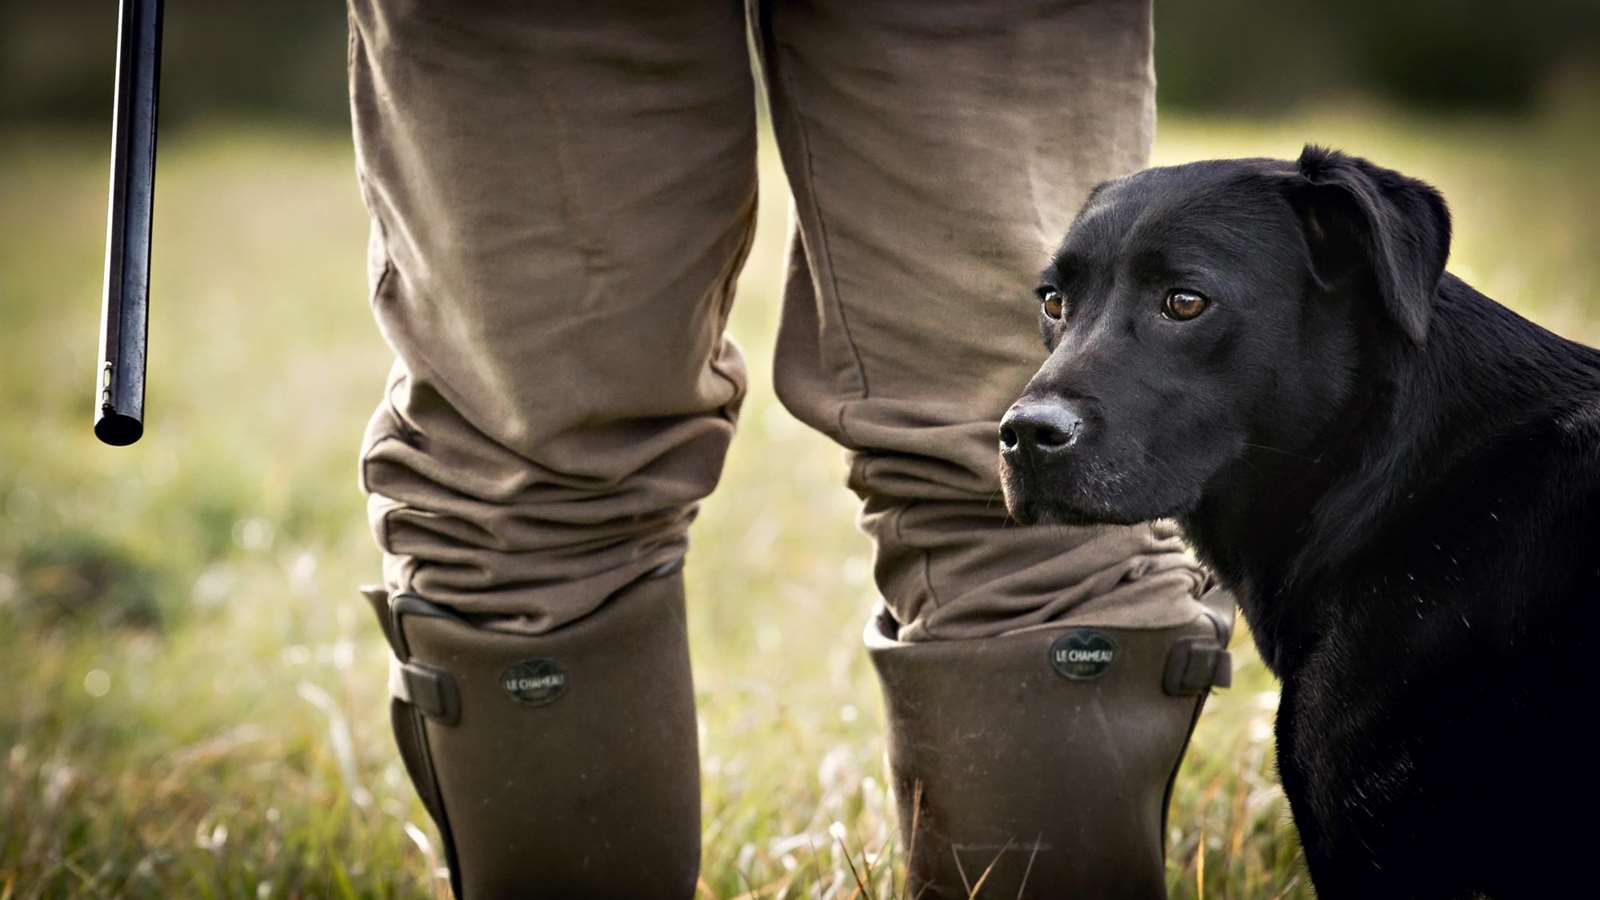 Man with his gundog at his side, coming to Goodwoof dog event.